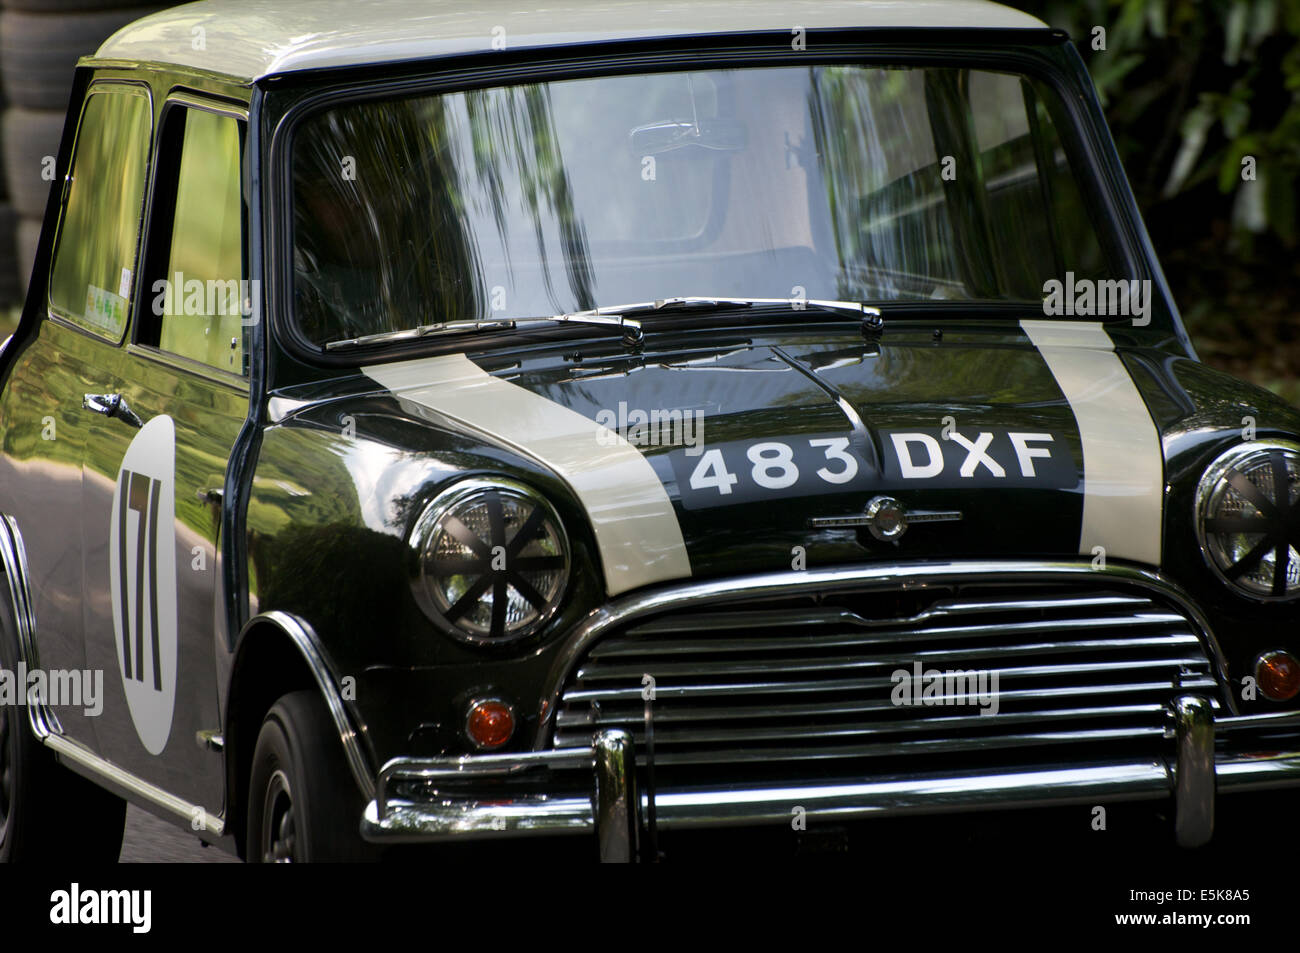 Minis racing at Wiscombe Park hillclimb in Devon UK, July 2014. A set of 18 images Stock Photo